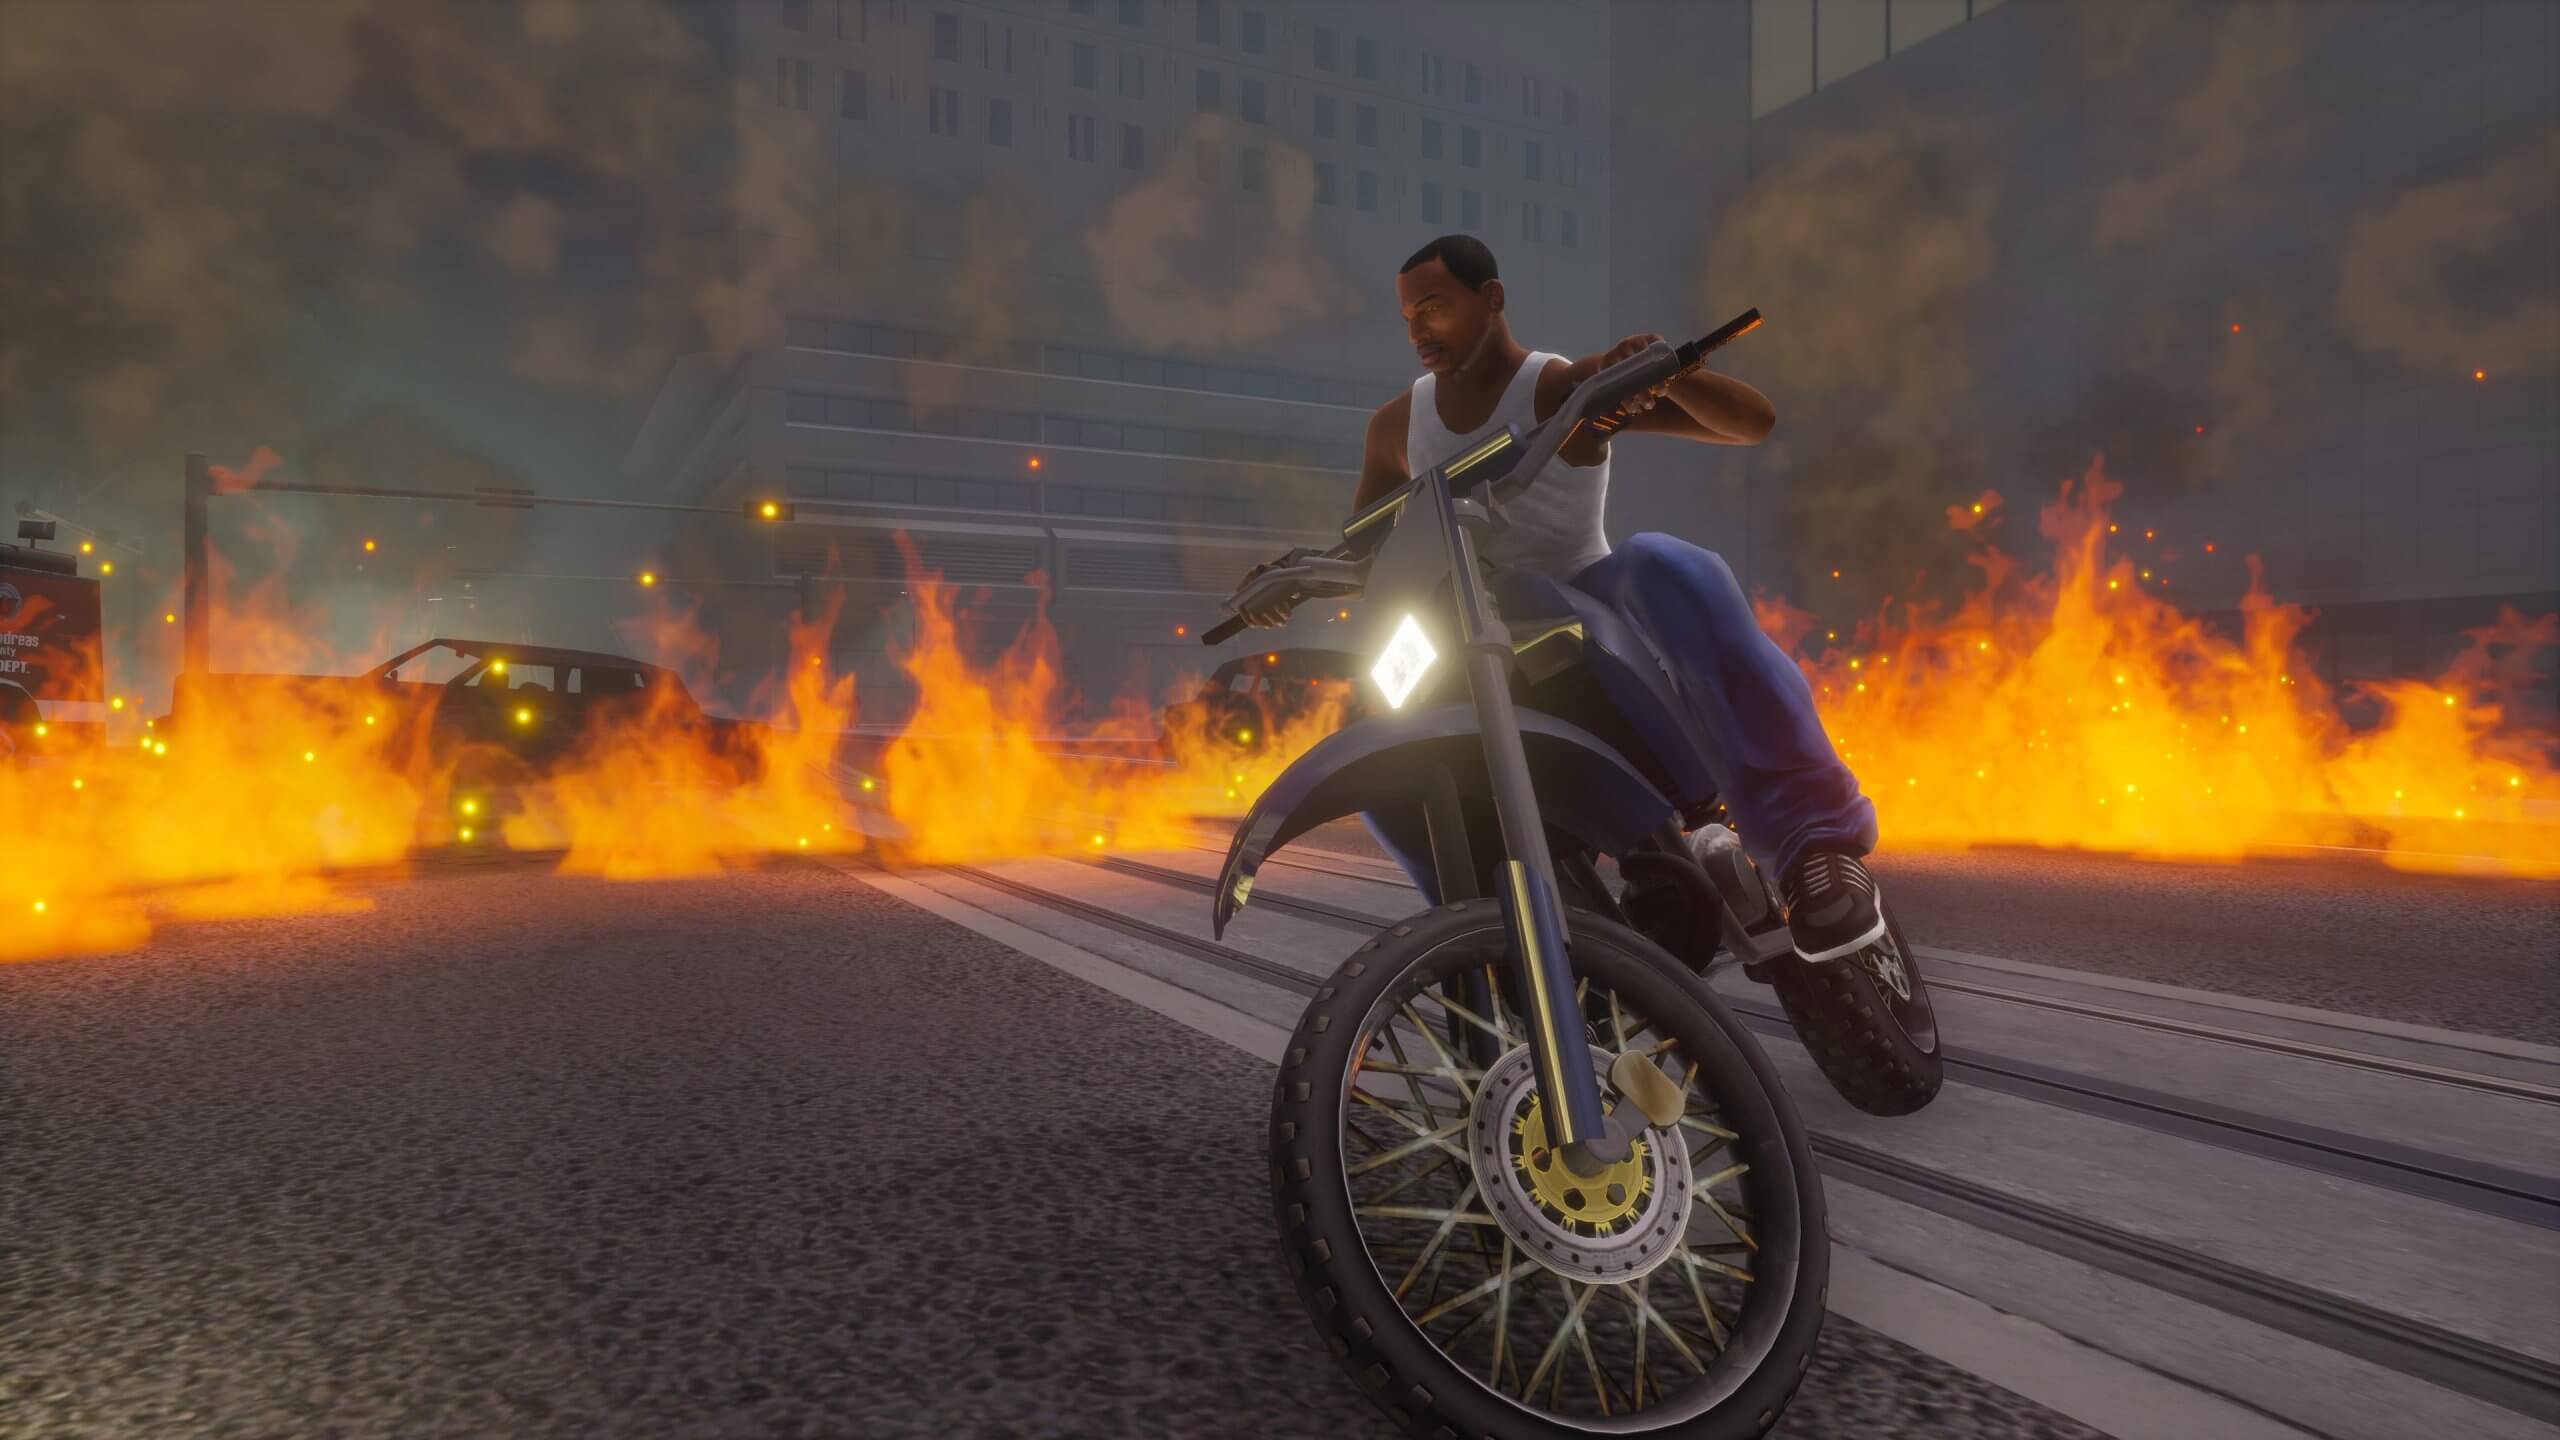 Grand-Theft-Auto-The-Trilogy-%E2%80%93-The-Definitive-Edition-screenshots-11-scaled.jpg